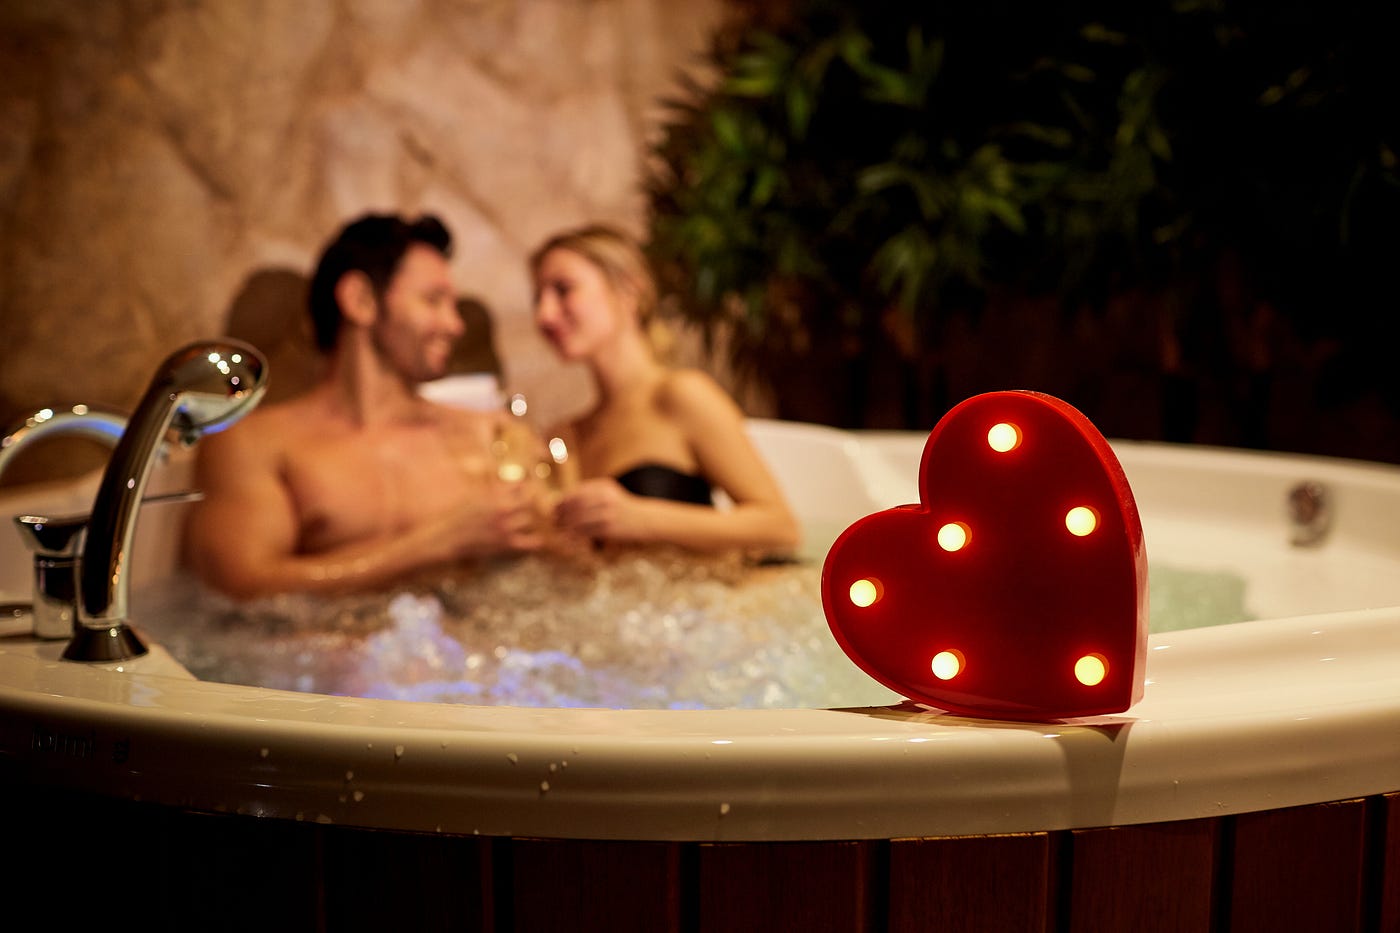 Enjoying Hot Tub Sex for the First Time by Holly Bradshaw Sexual Tendencies Medium image